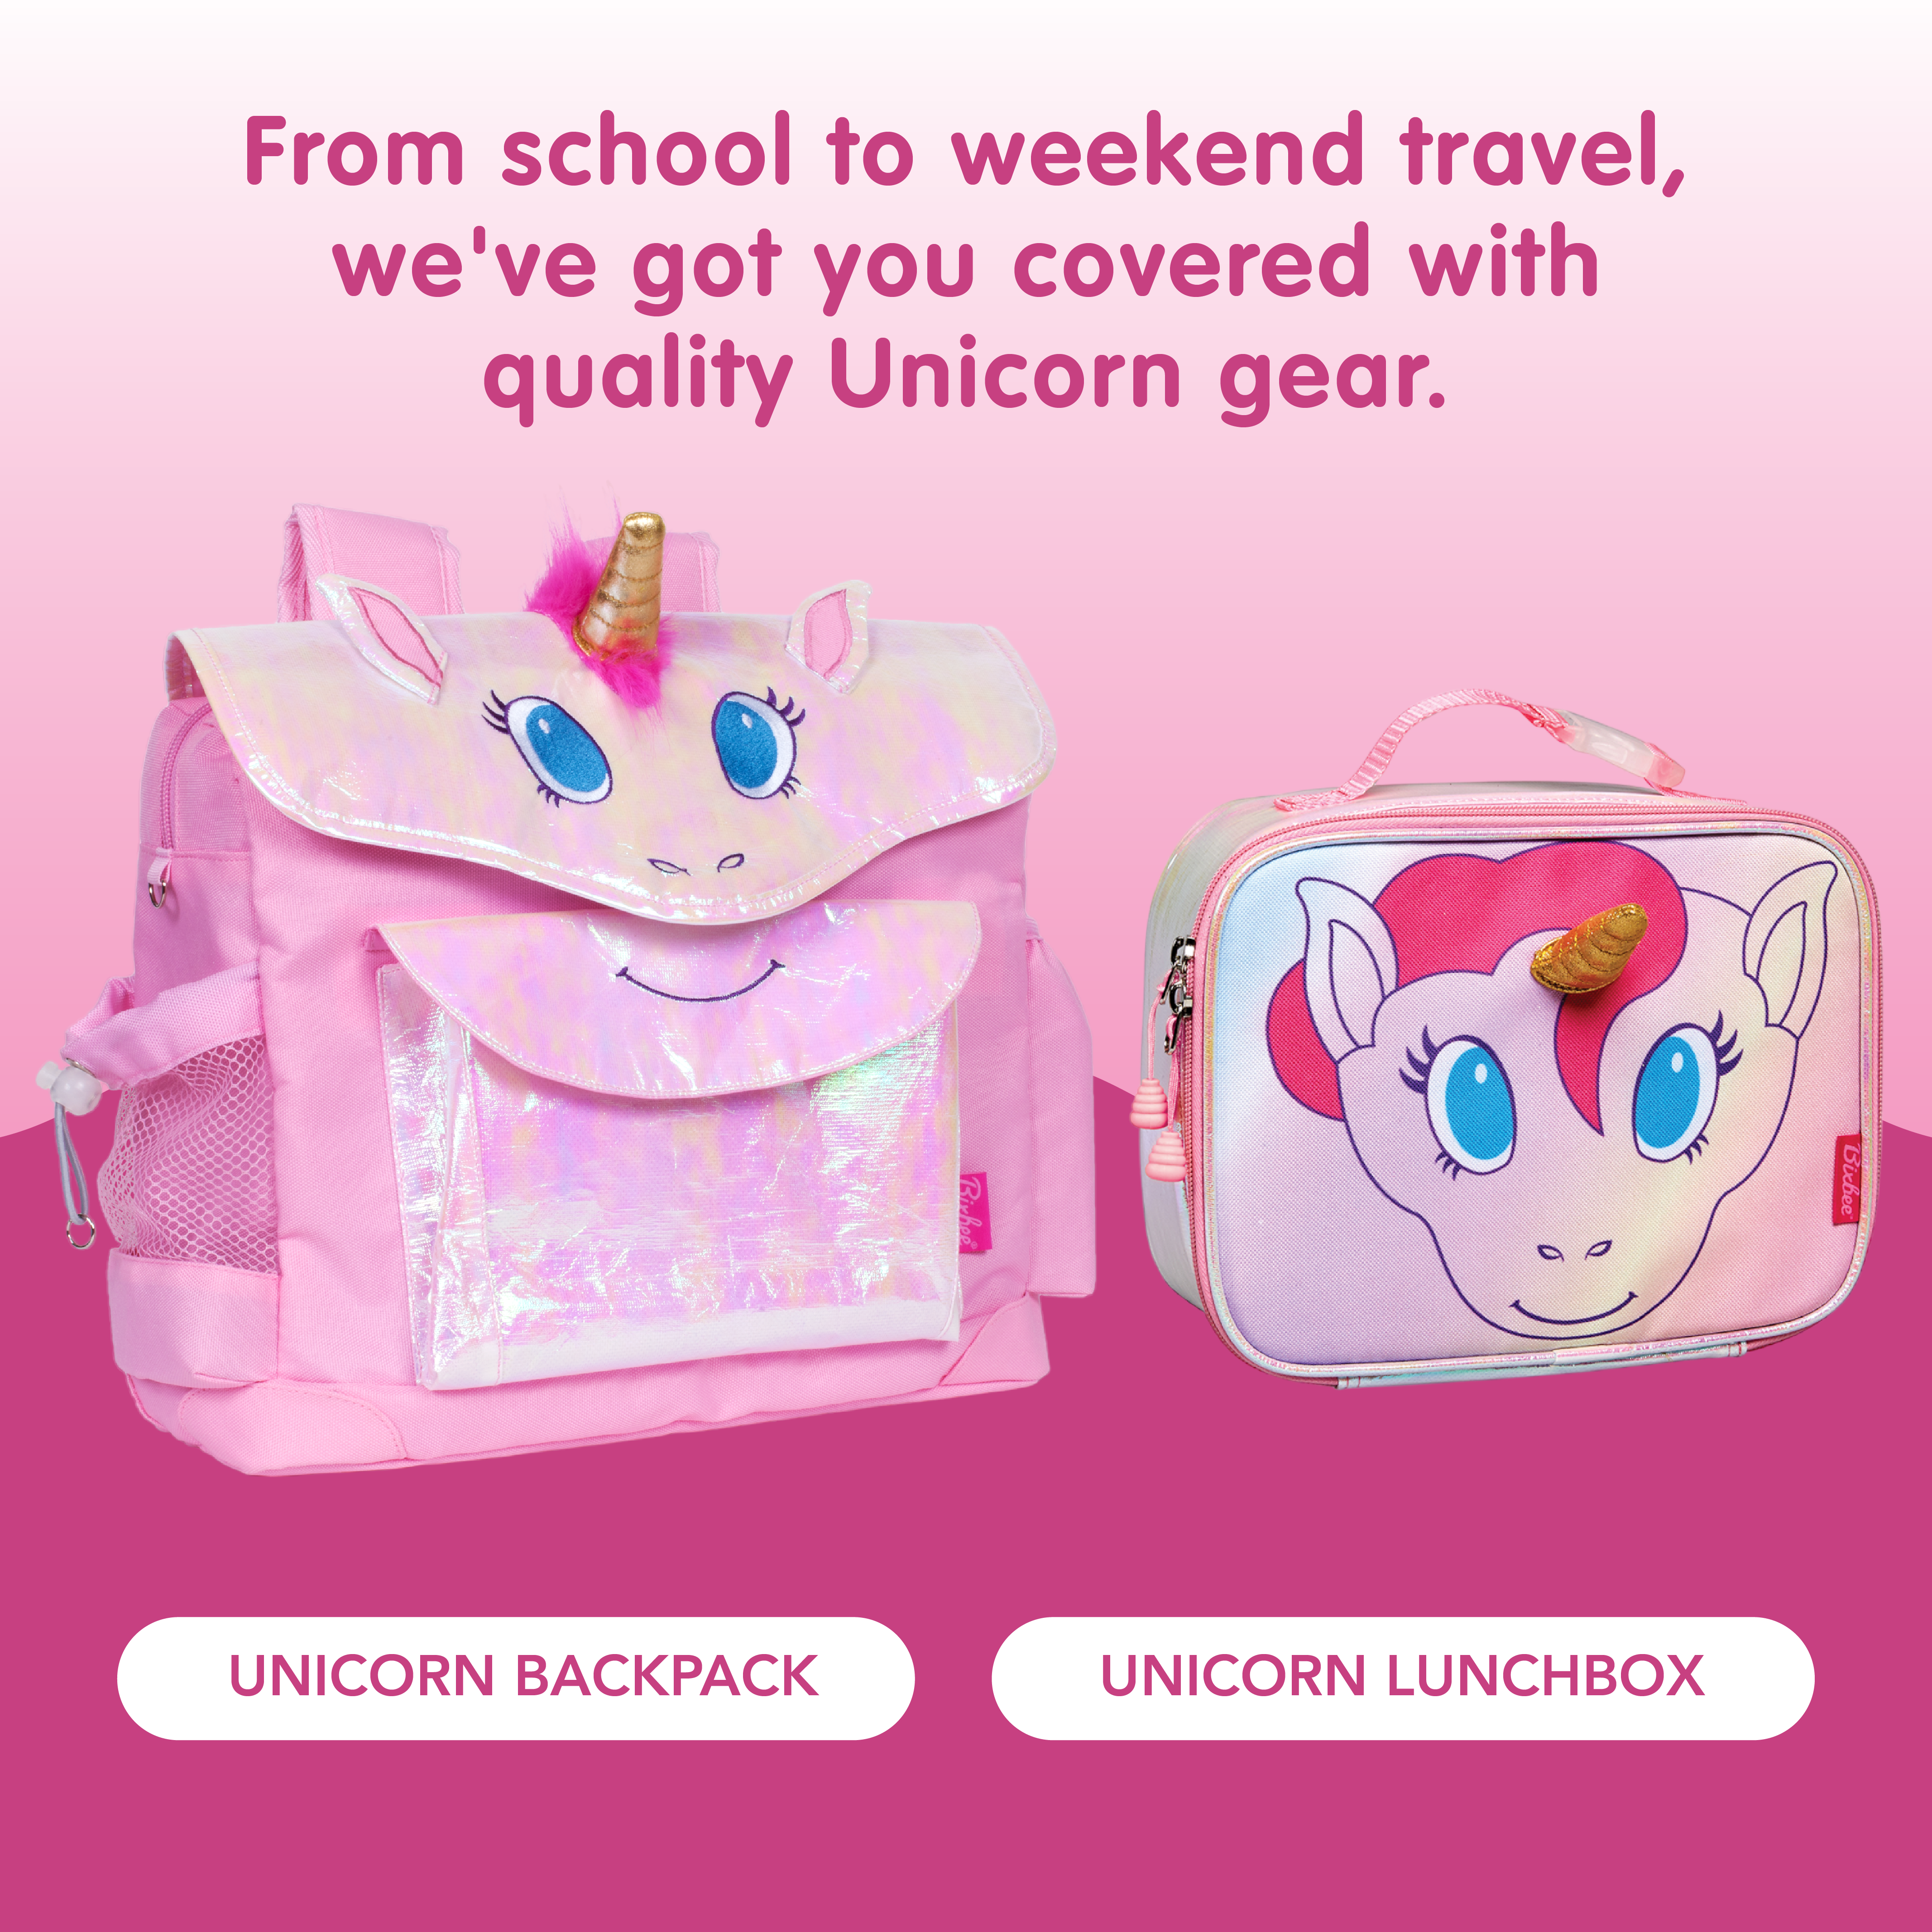 Bixbee Unicorn Lunchbox - Kids Lunch Box, Insulated Lunch Bag for Girls and  Boys, Lunch Boxes Kids for School, Small Lunch Tote for Toddlers